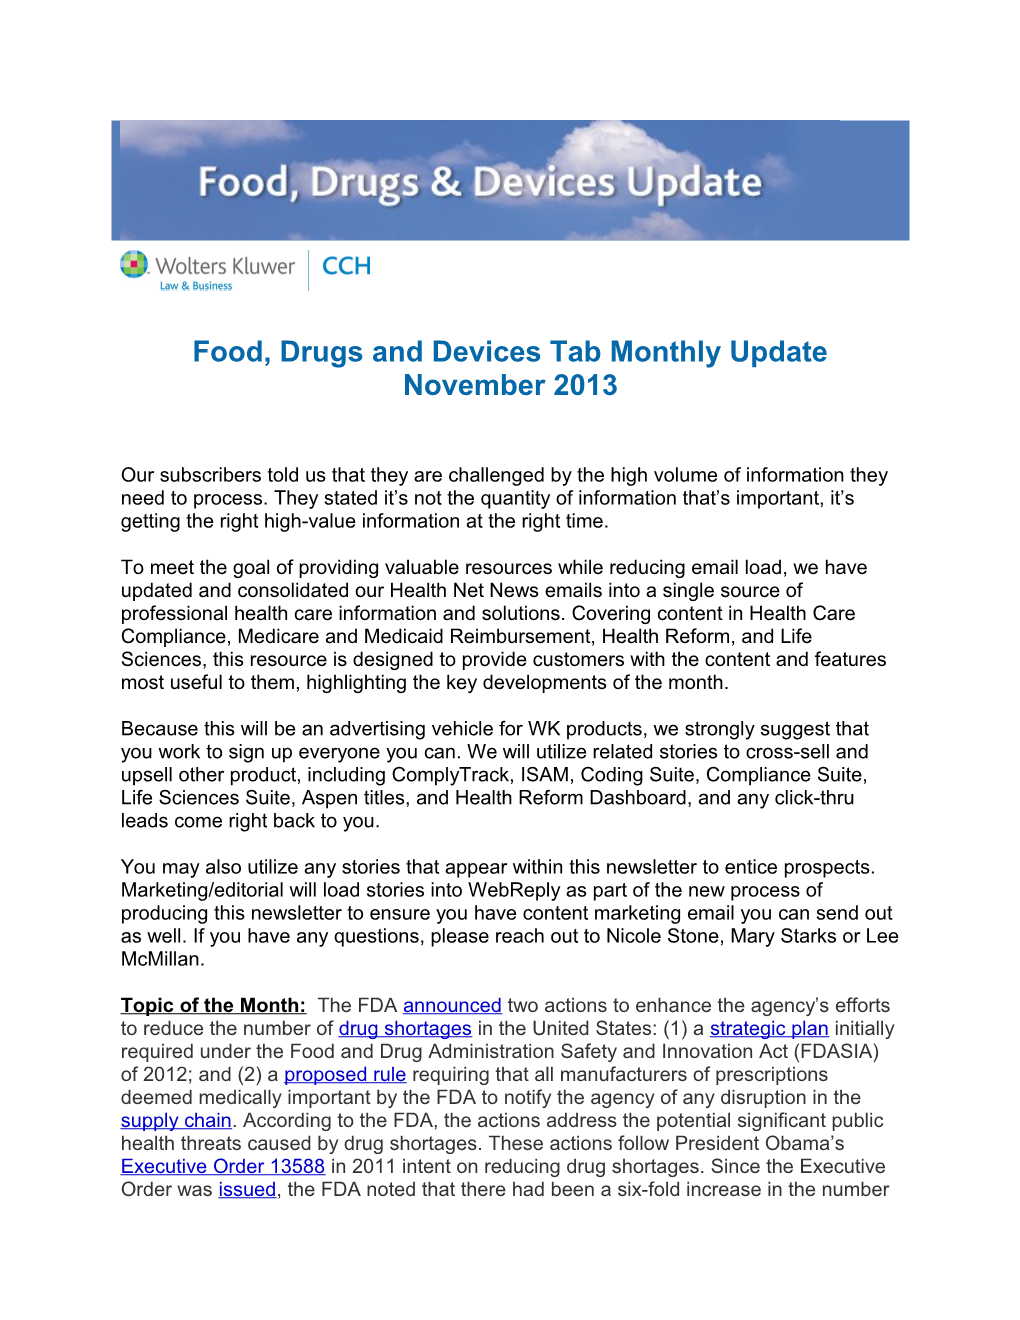 Food, Drugs and Devices Tab Monthly Update